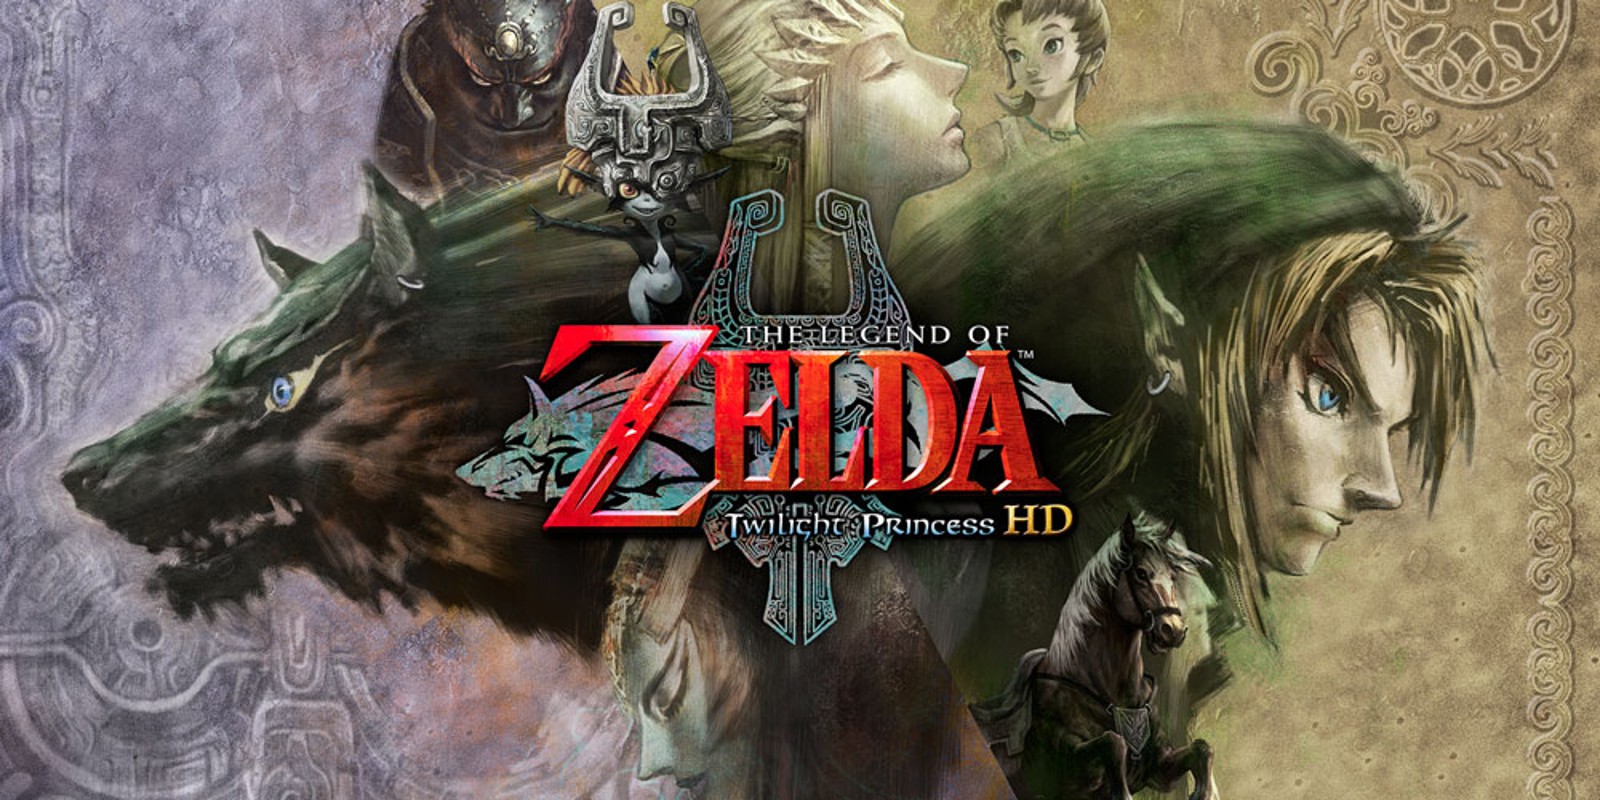 playground Analyst Does not move The Legend of Zelda: Twilight Princess HD | Wii U games | Games | Nintendo